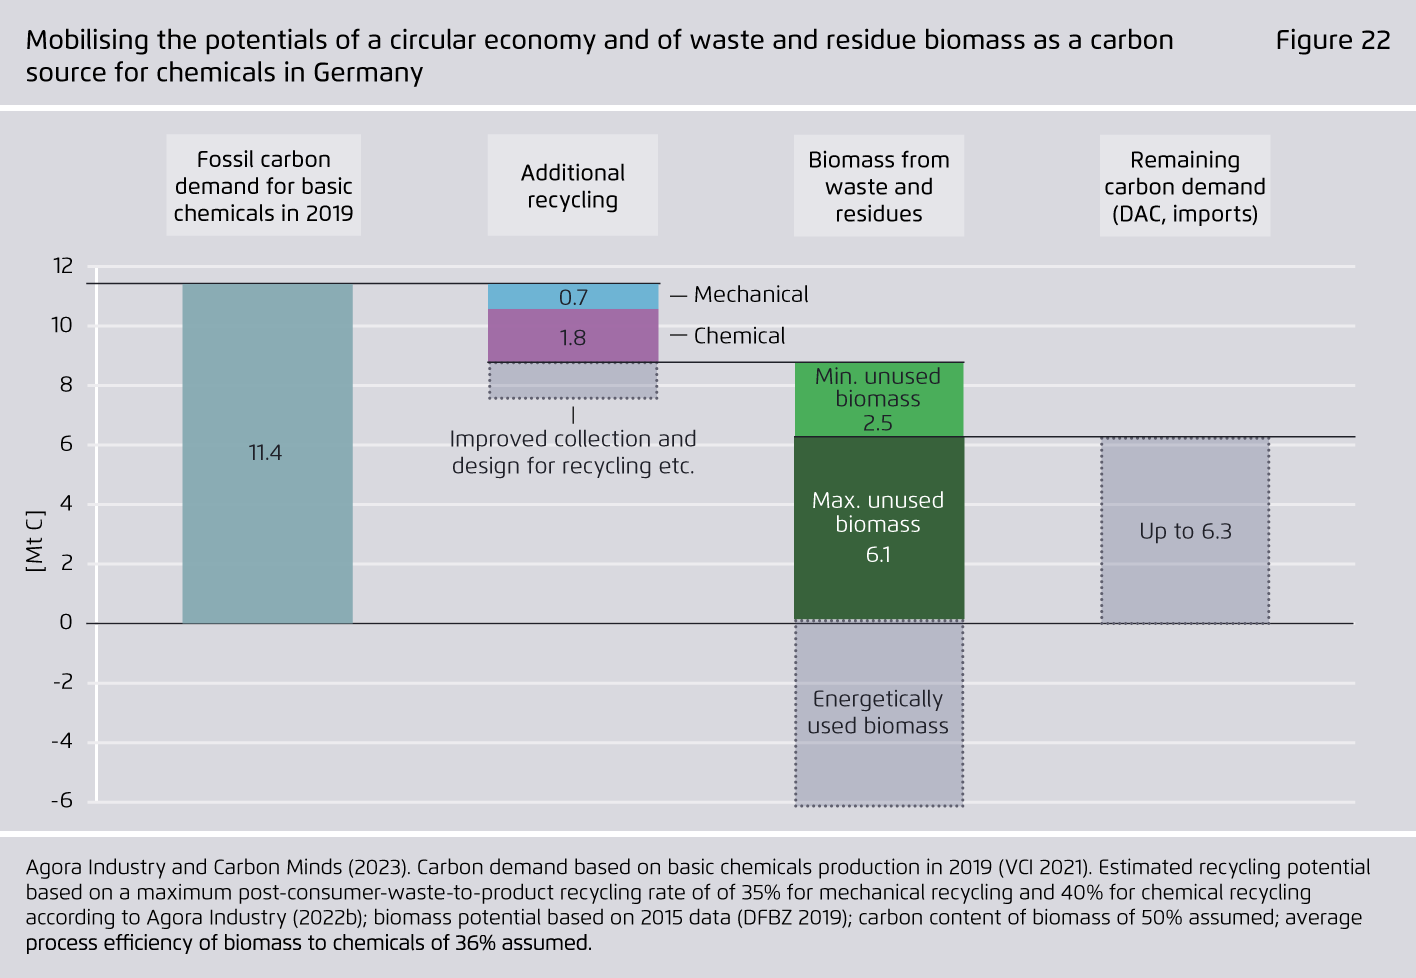 Preview for Mobilising the potentials of a circular economy and of waste and residue biomass as a carbon source for chemicals in Germany